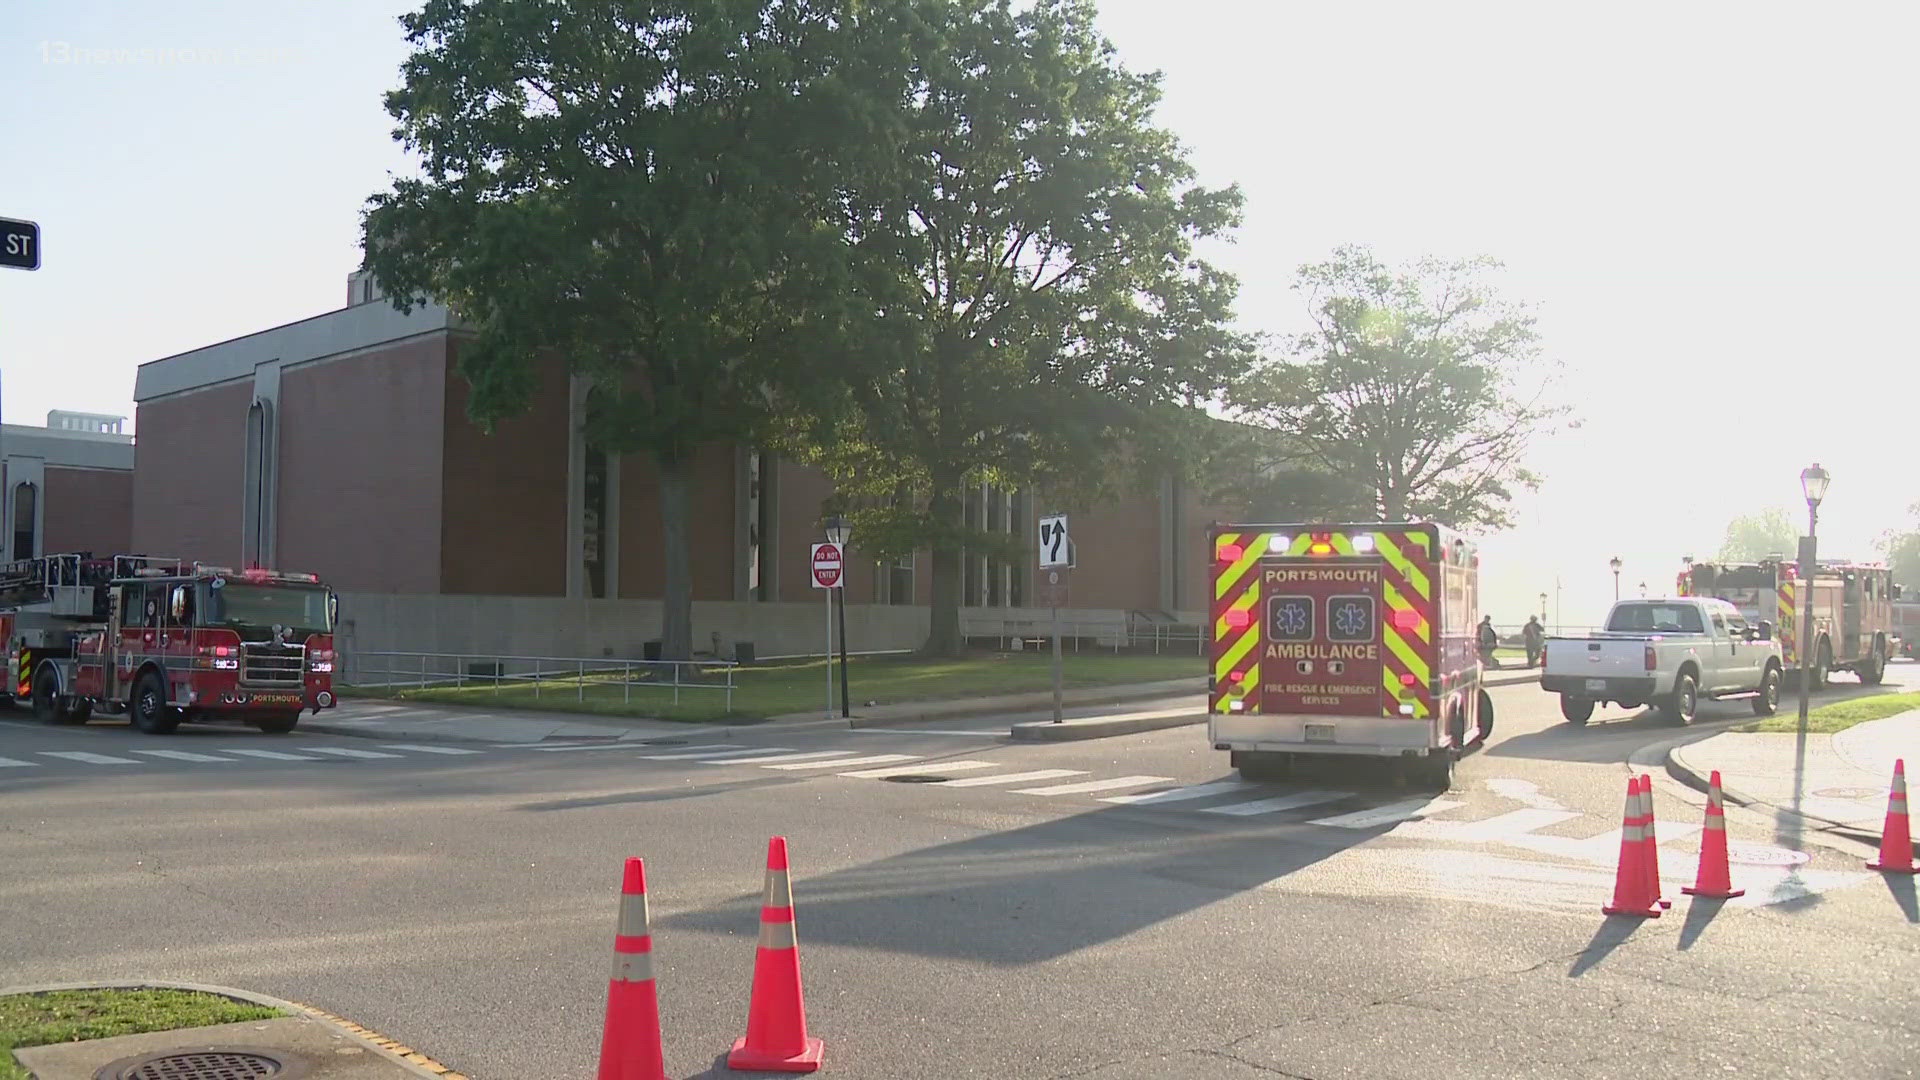 More than 150 inmates were forced to evacuate Portsmouth City Jail early this morning.